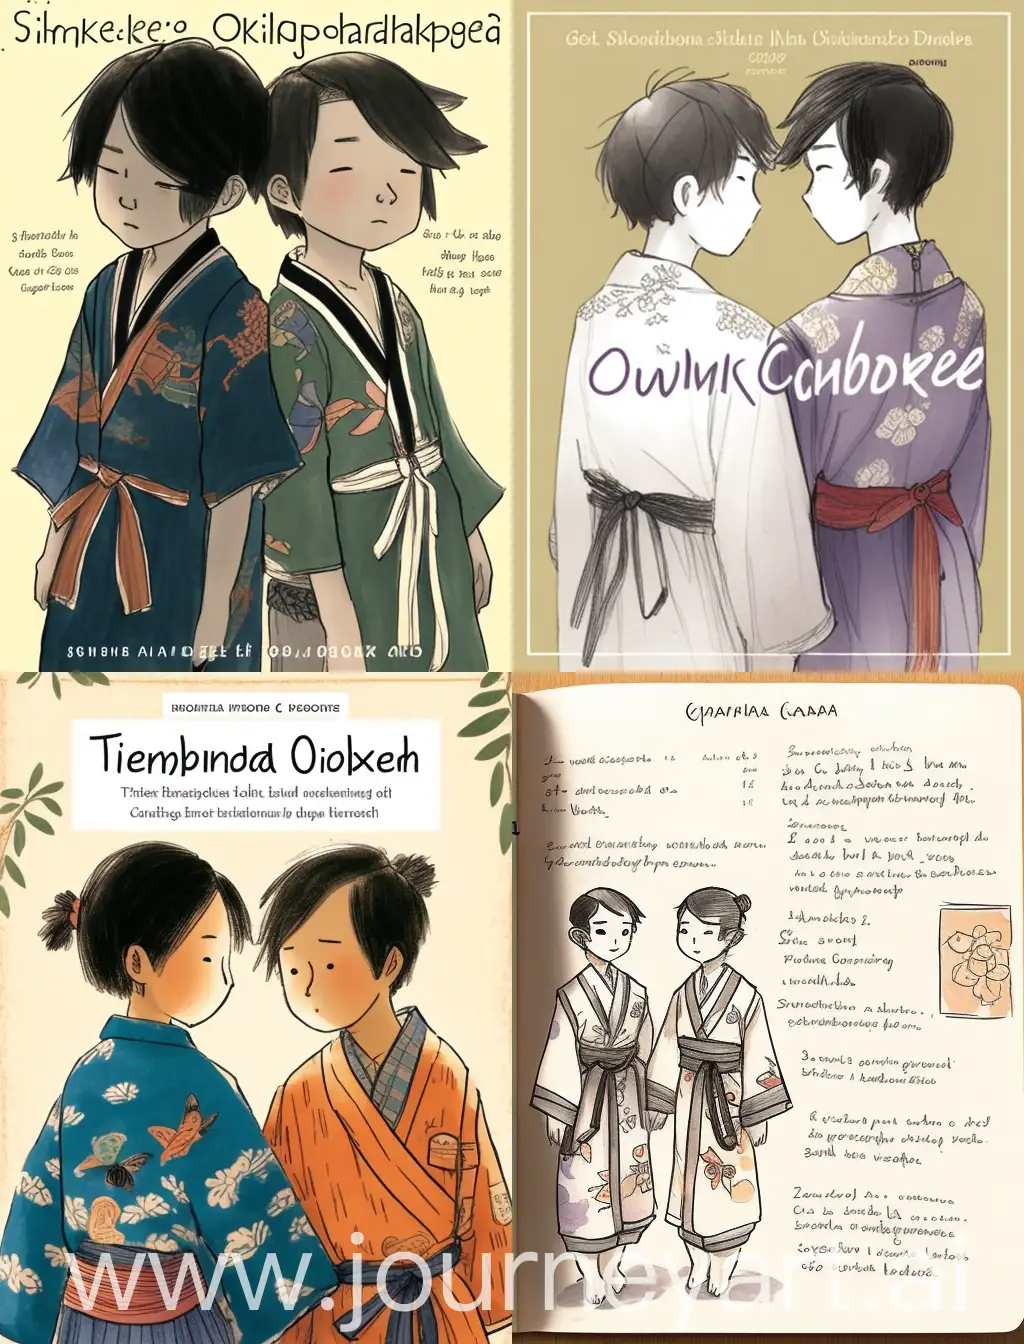 Affectionate-Japanese-Teen-Boyfriends-Embrace-in-Traditional-Kimonos